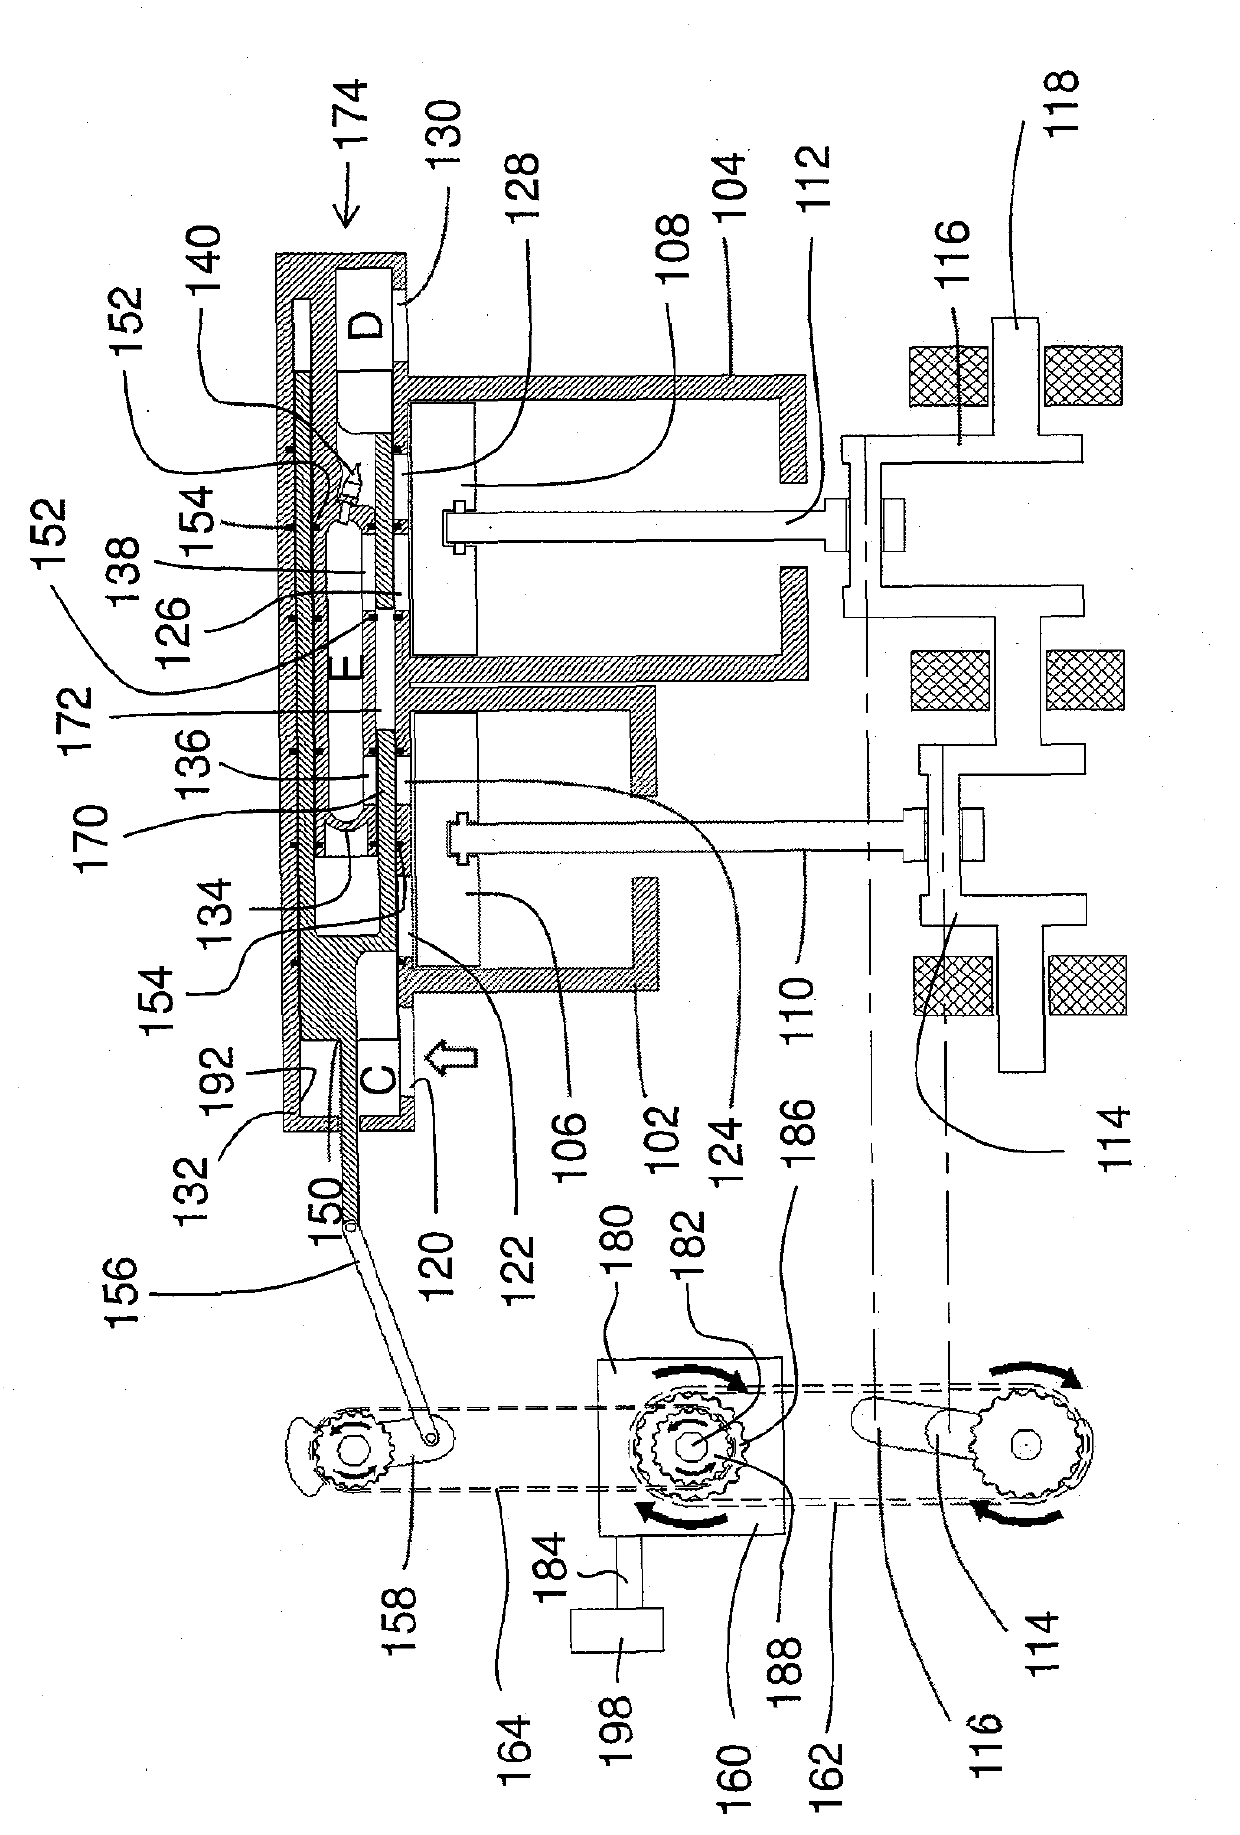 Split cycle engine with crossover shuttle valve